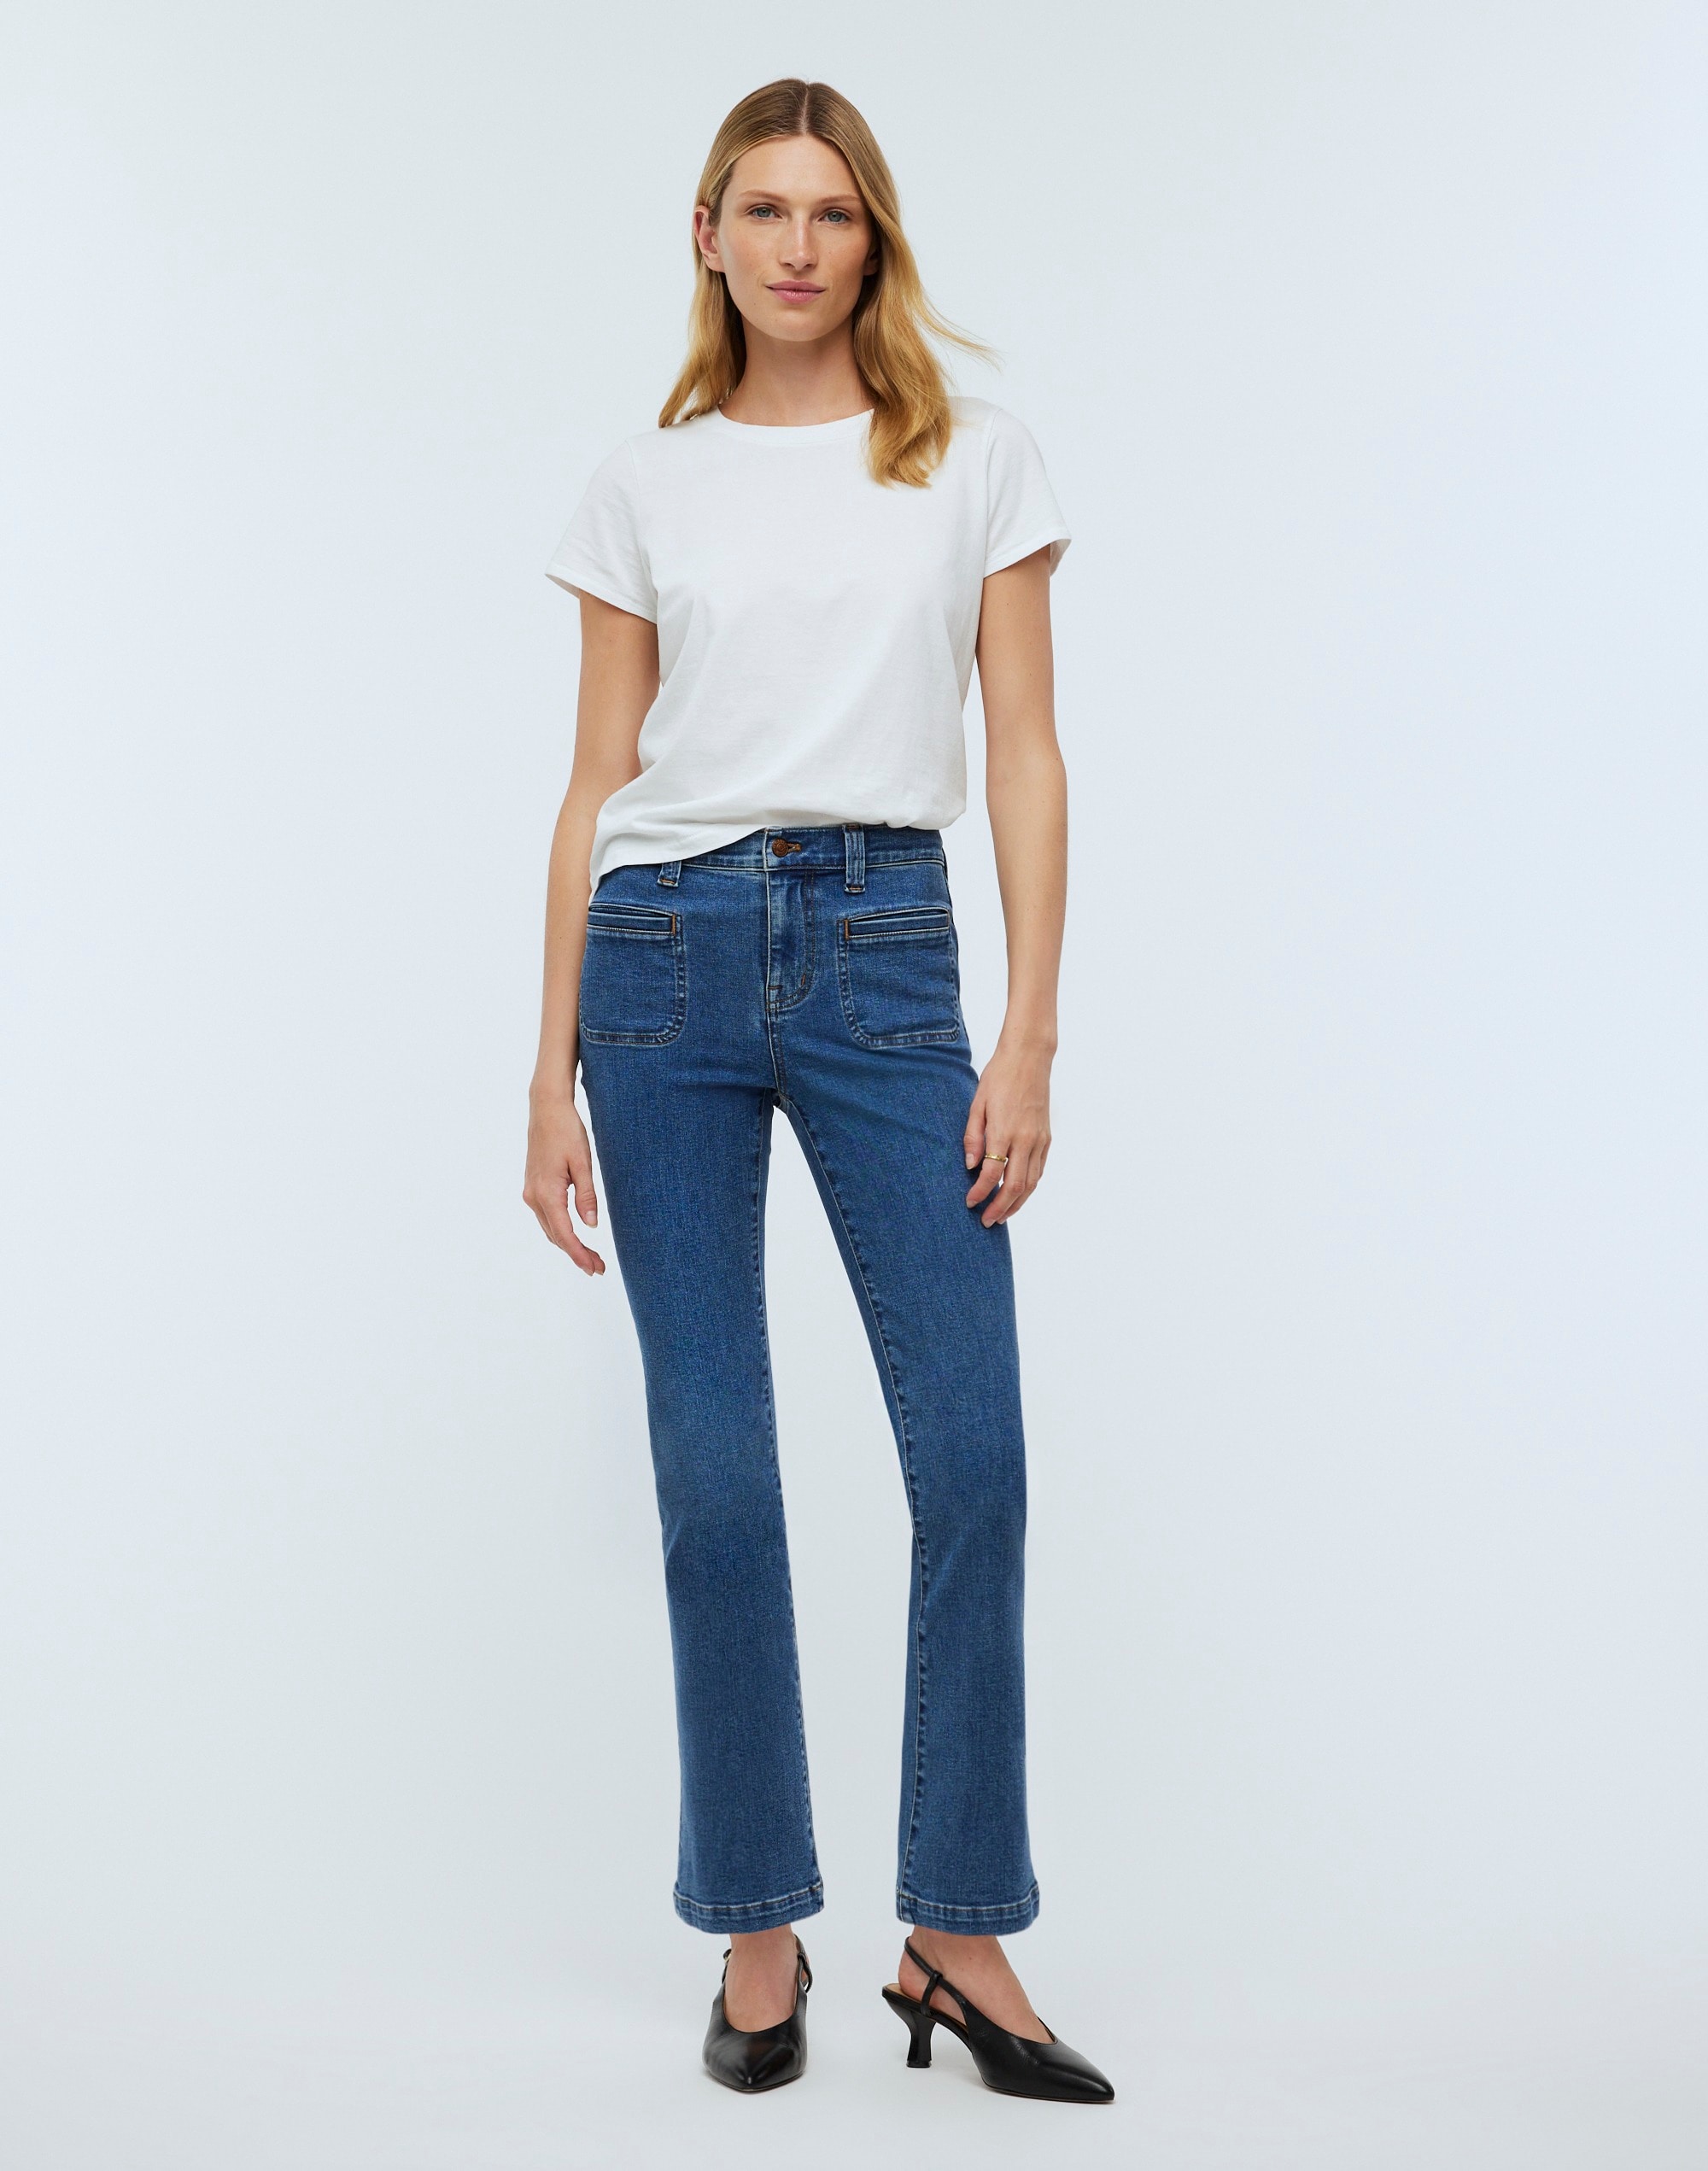 Mw Kick Out Crop Jeans In Elkton Wash